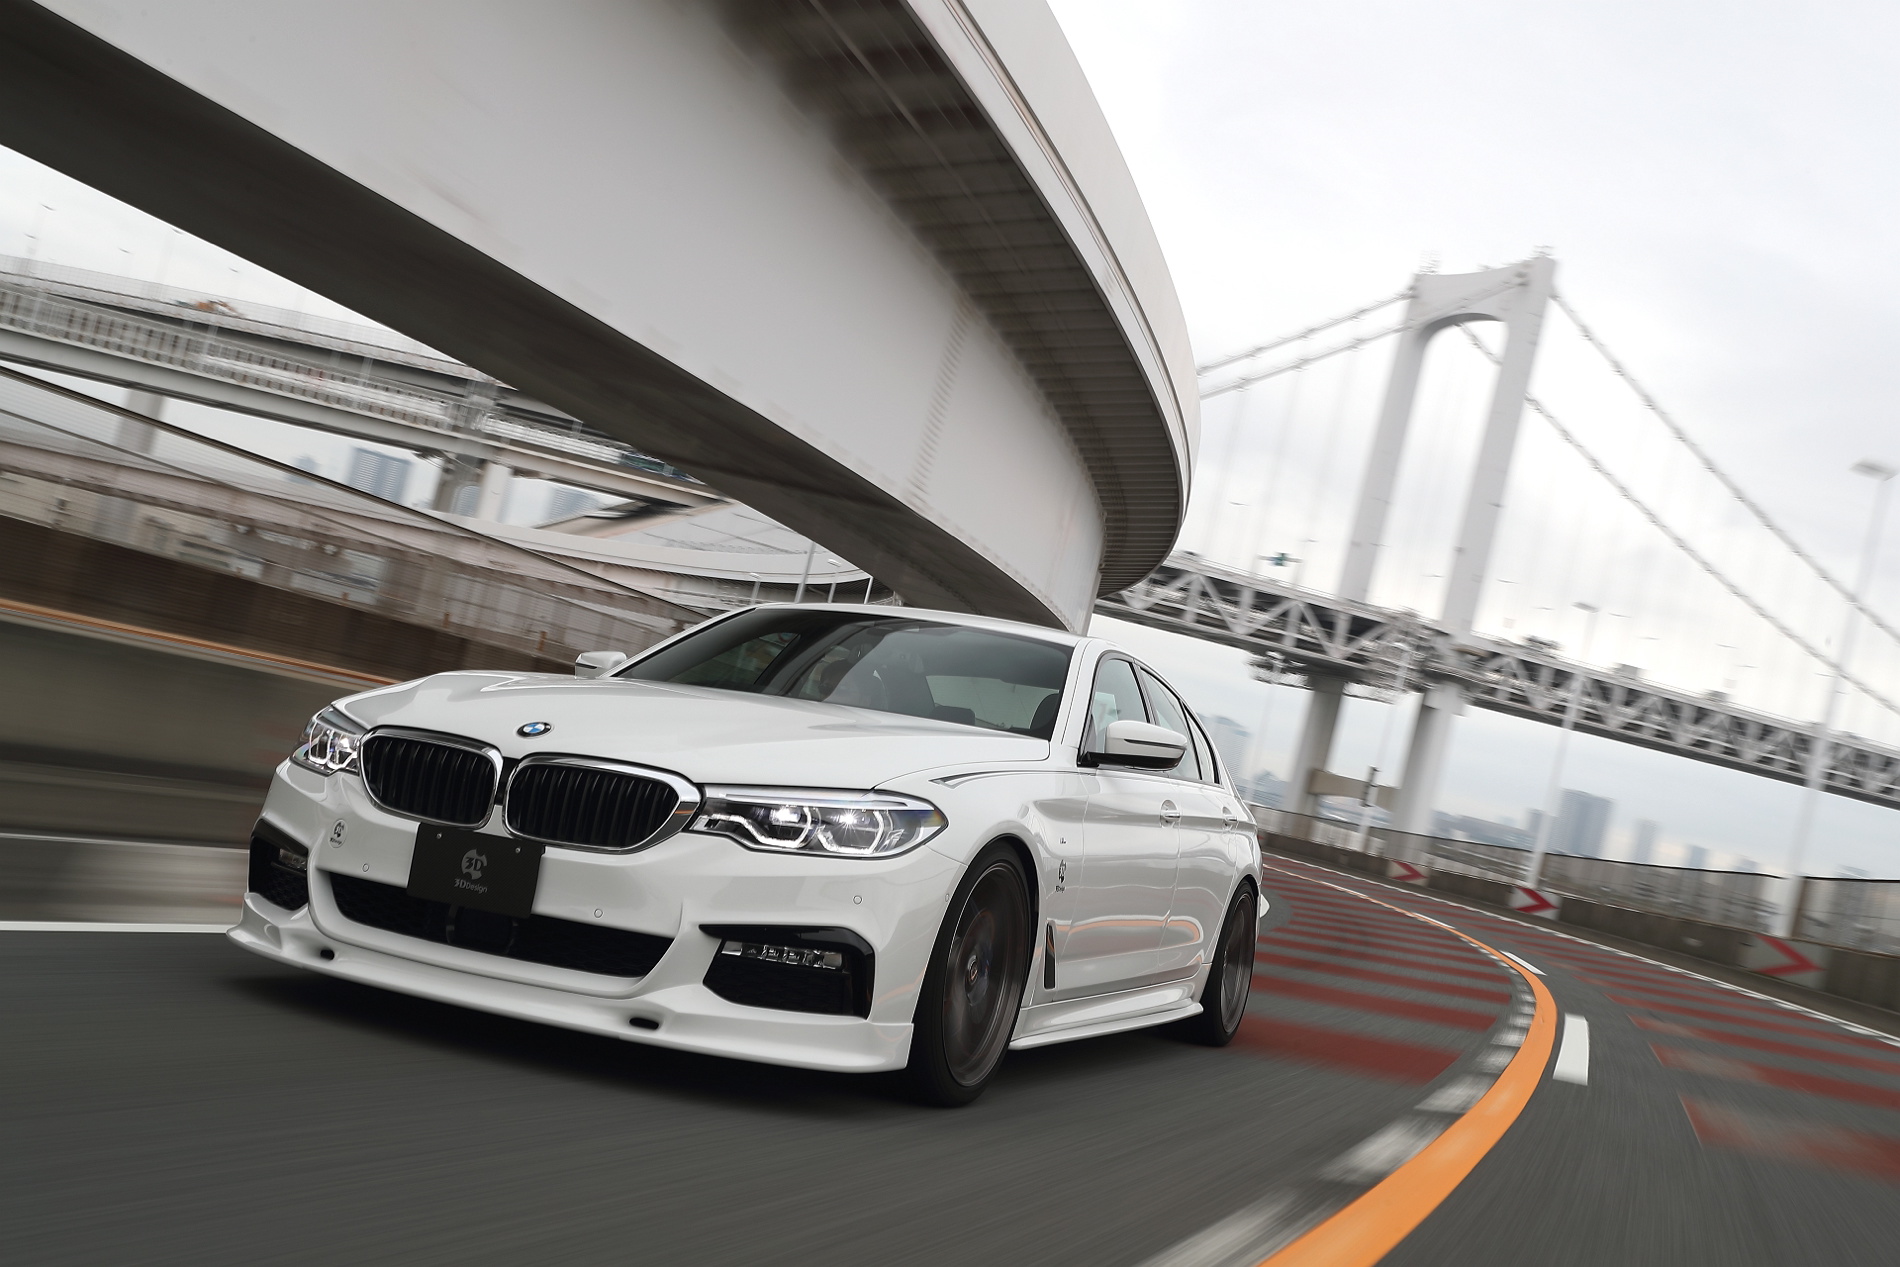 New Tuning Program for BMW G30 5 Series Released by 3D Design - BMW.SG